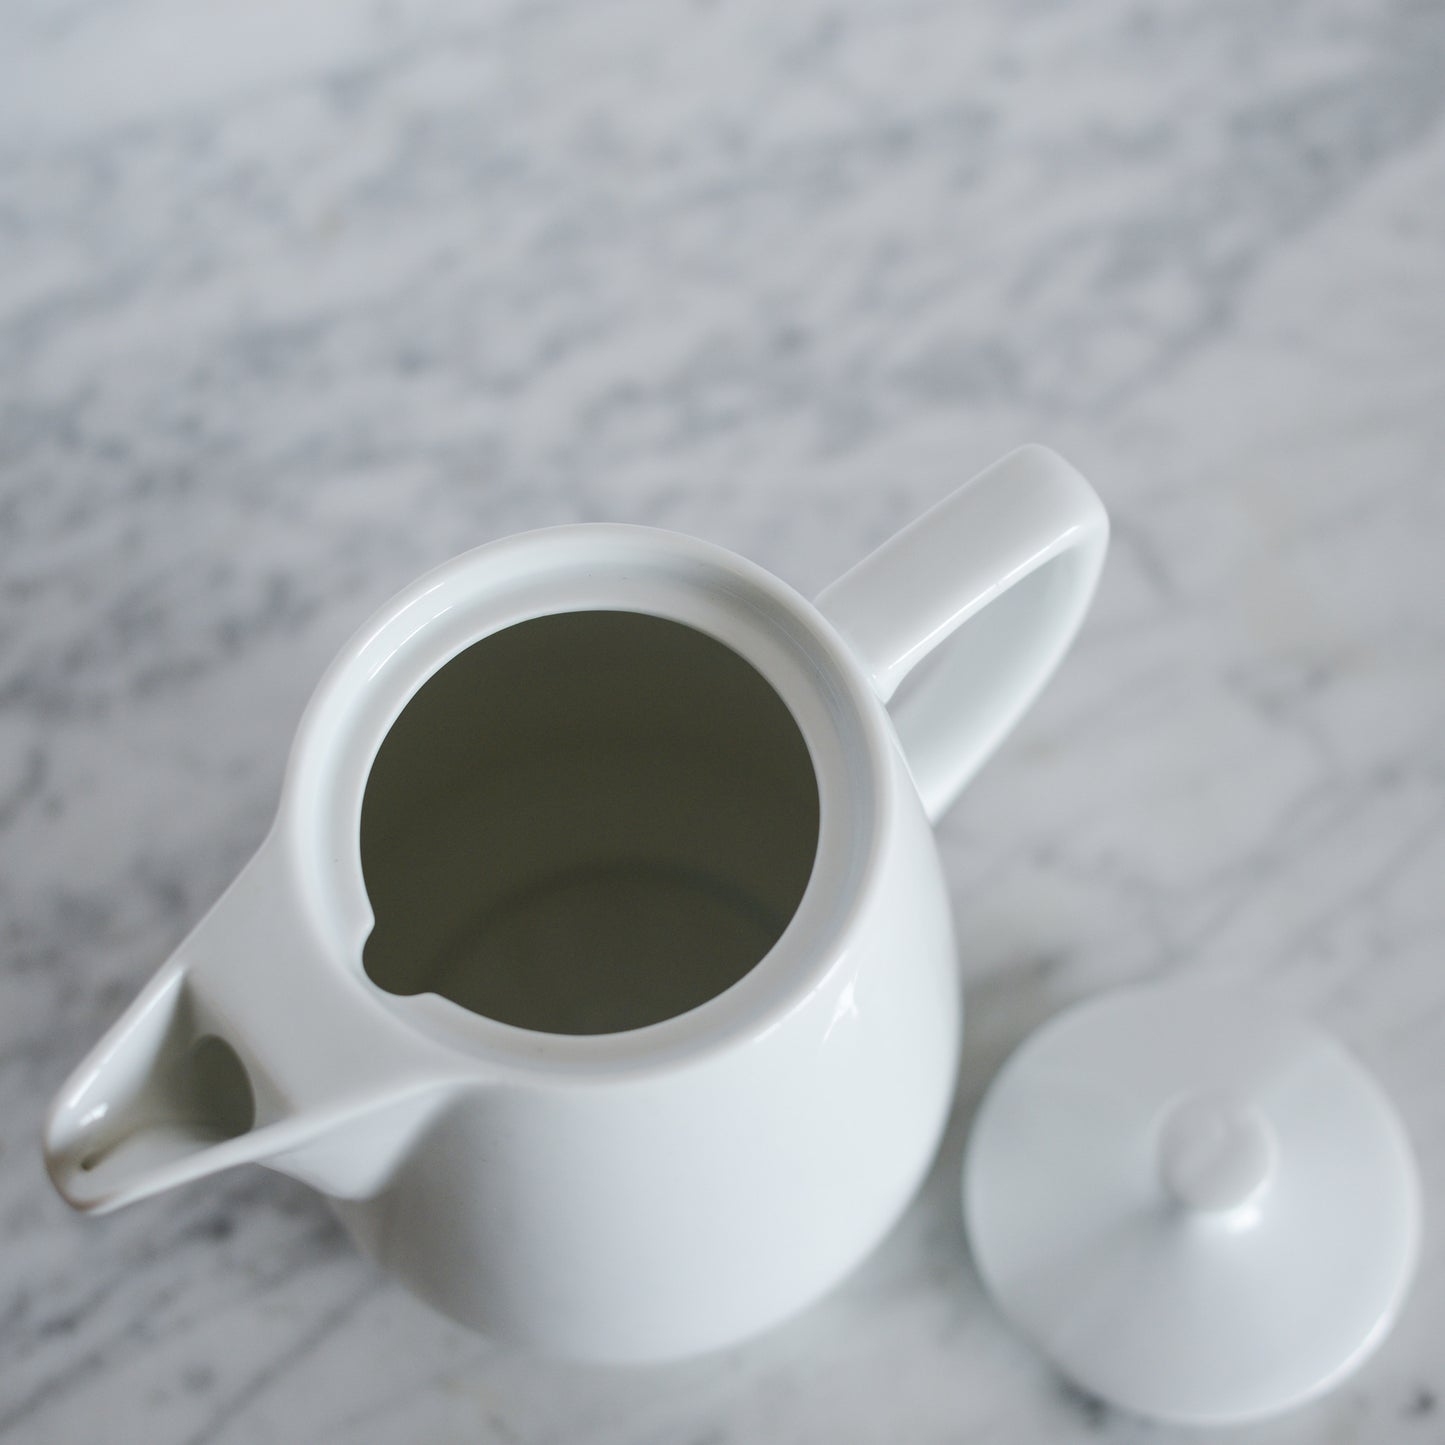 White Porcelain Coffee Carafe by Melitta